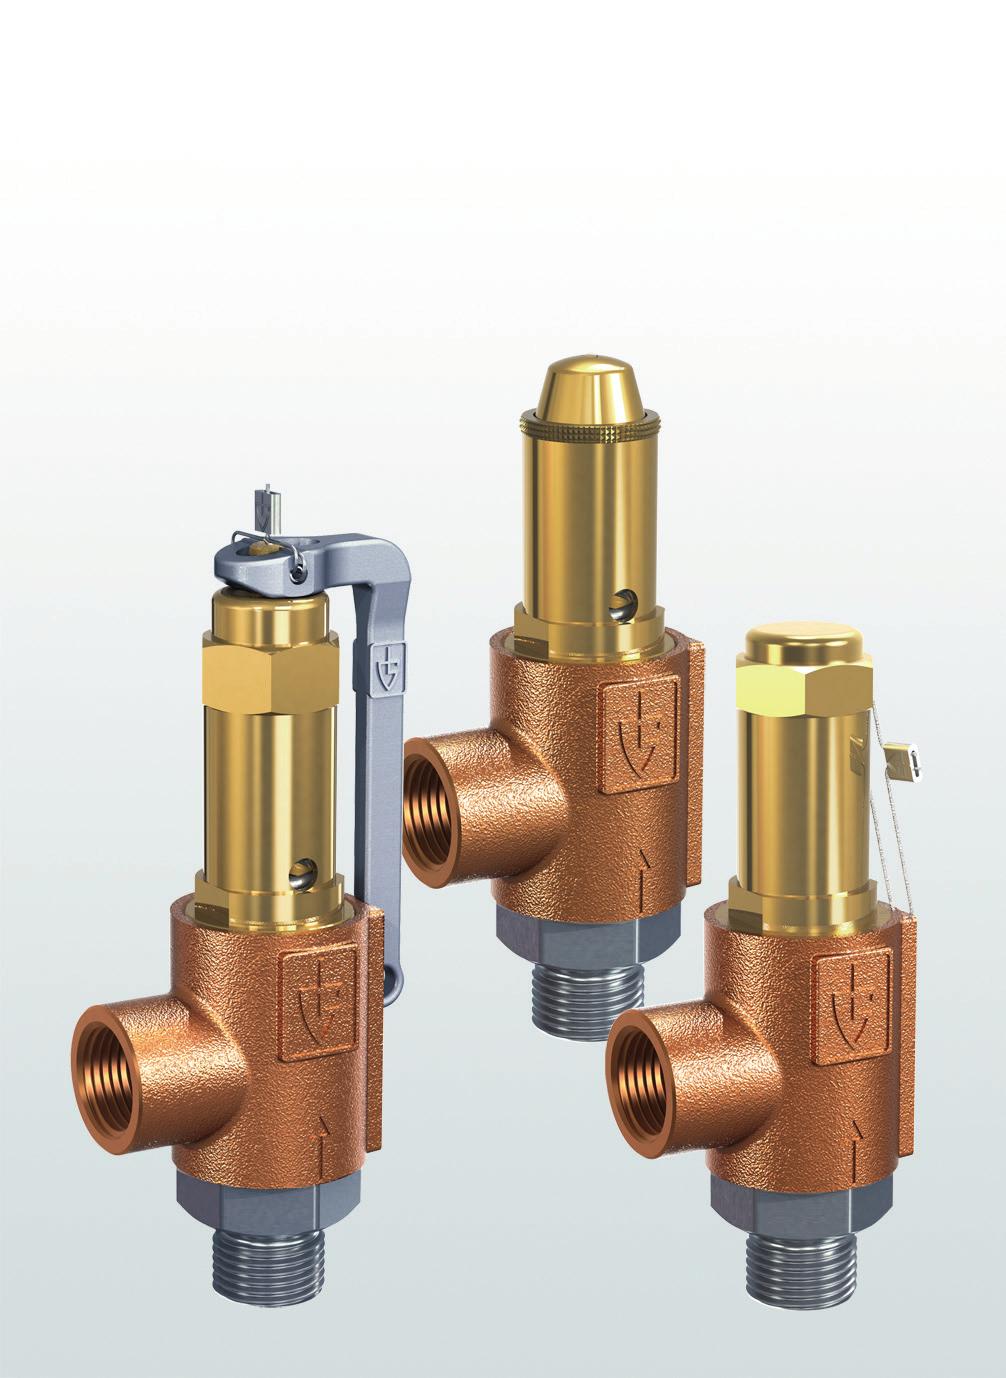 Type test approved safety valves angle-type for industrial applications 3.